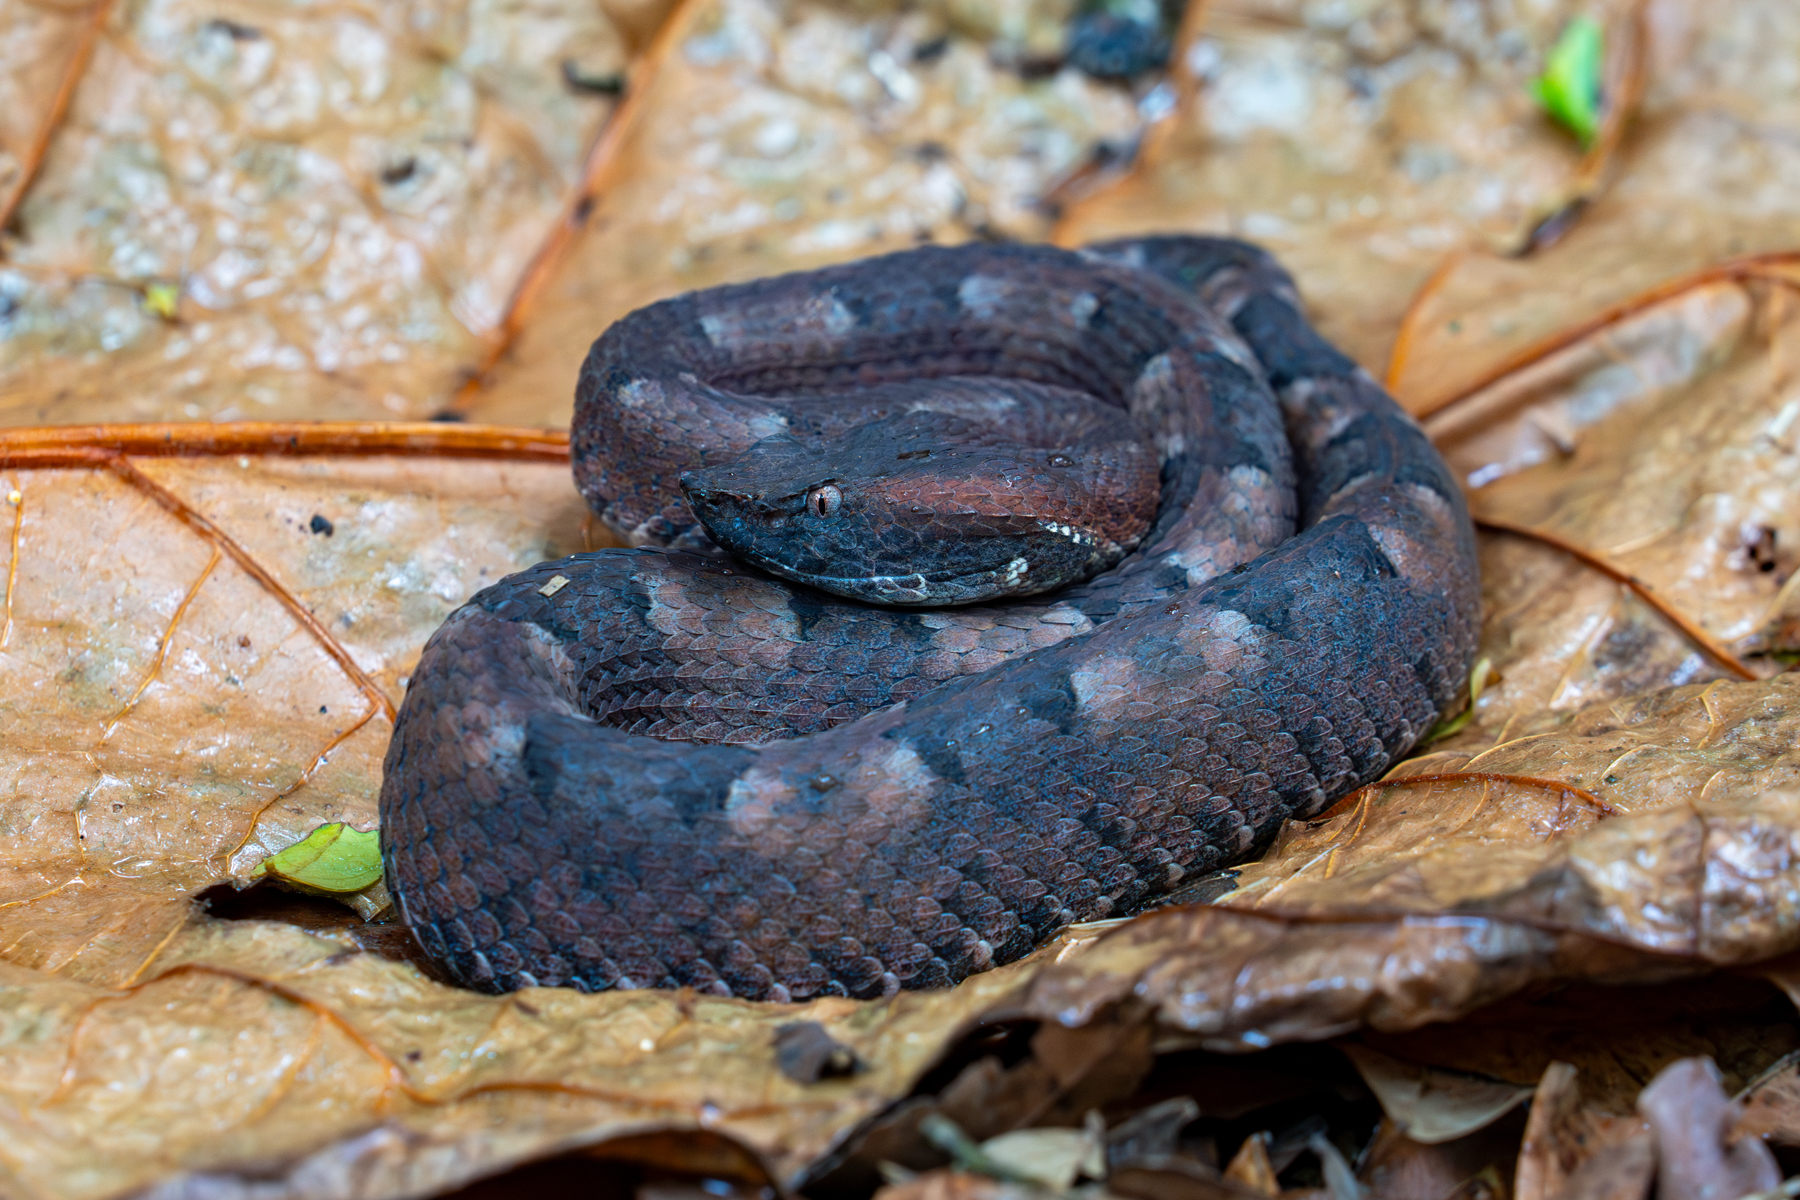 The intent stare of a Rainforest Hog-nosed Pit Viper on the dead leaves of the forest floor (image by Inger Vandyke)